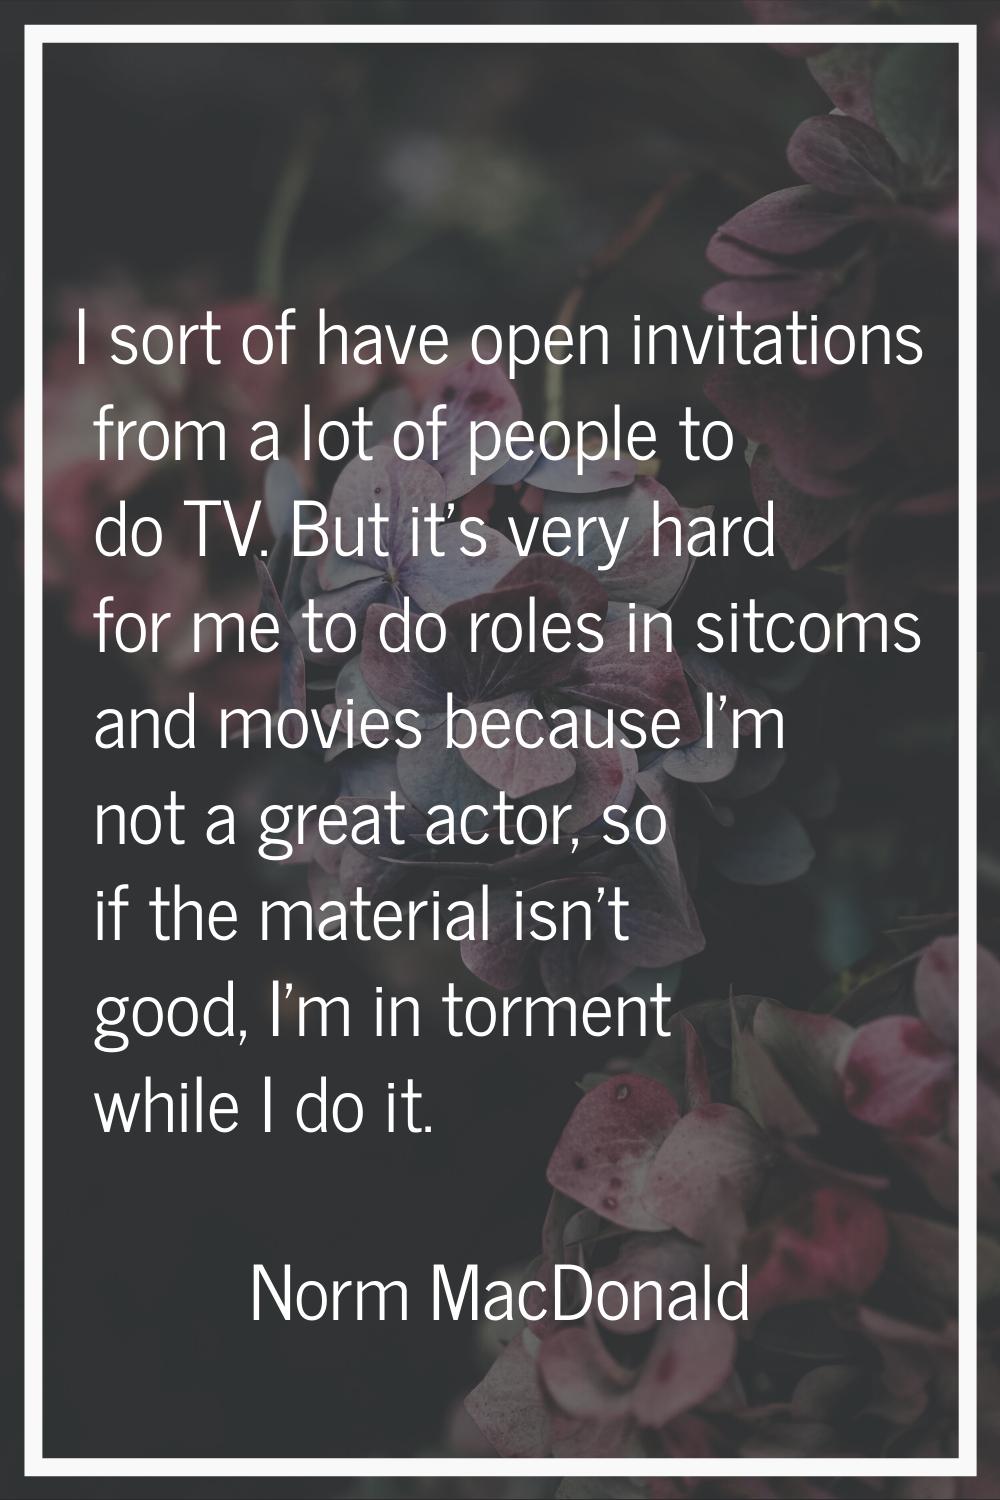 I sort of have open invitations from a lot of people to do TV. But it's very hard for me to do role